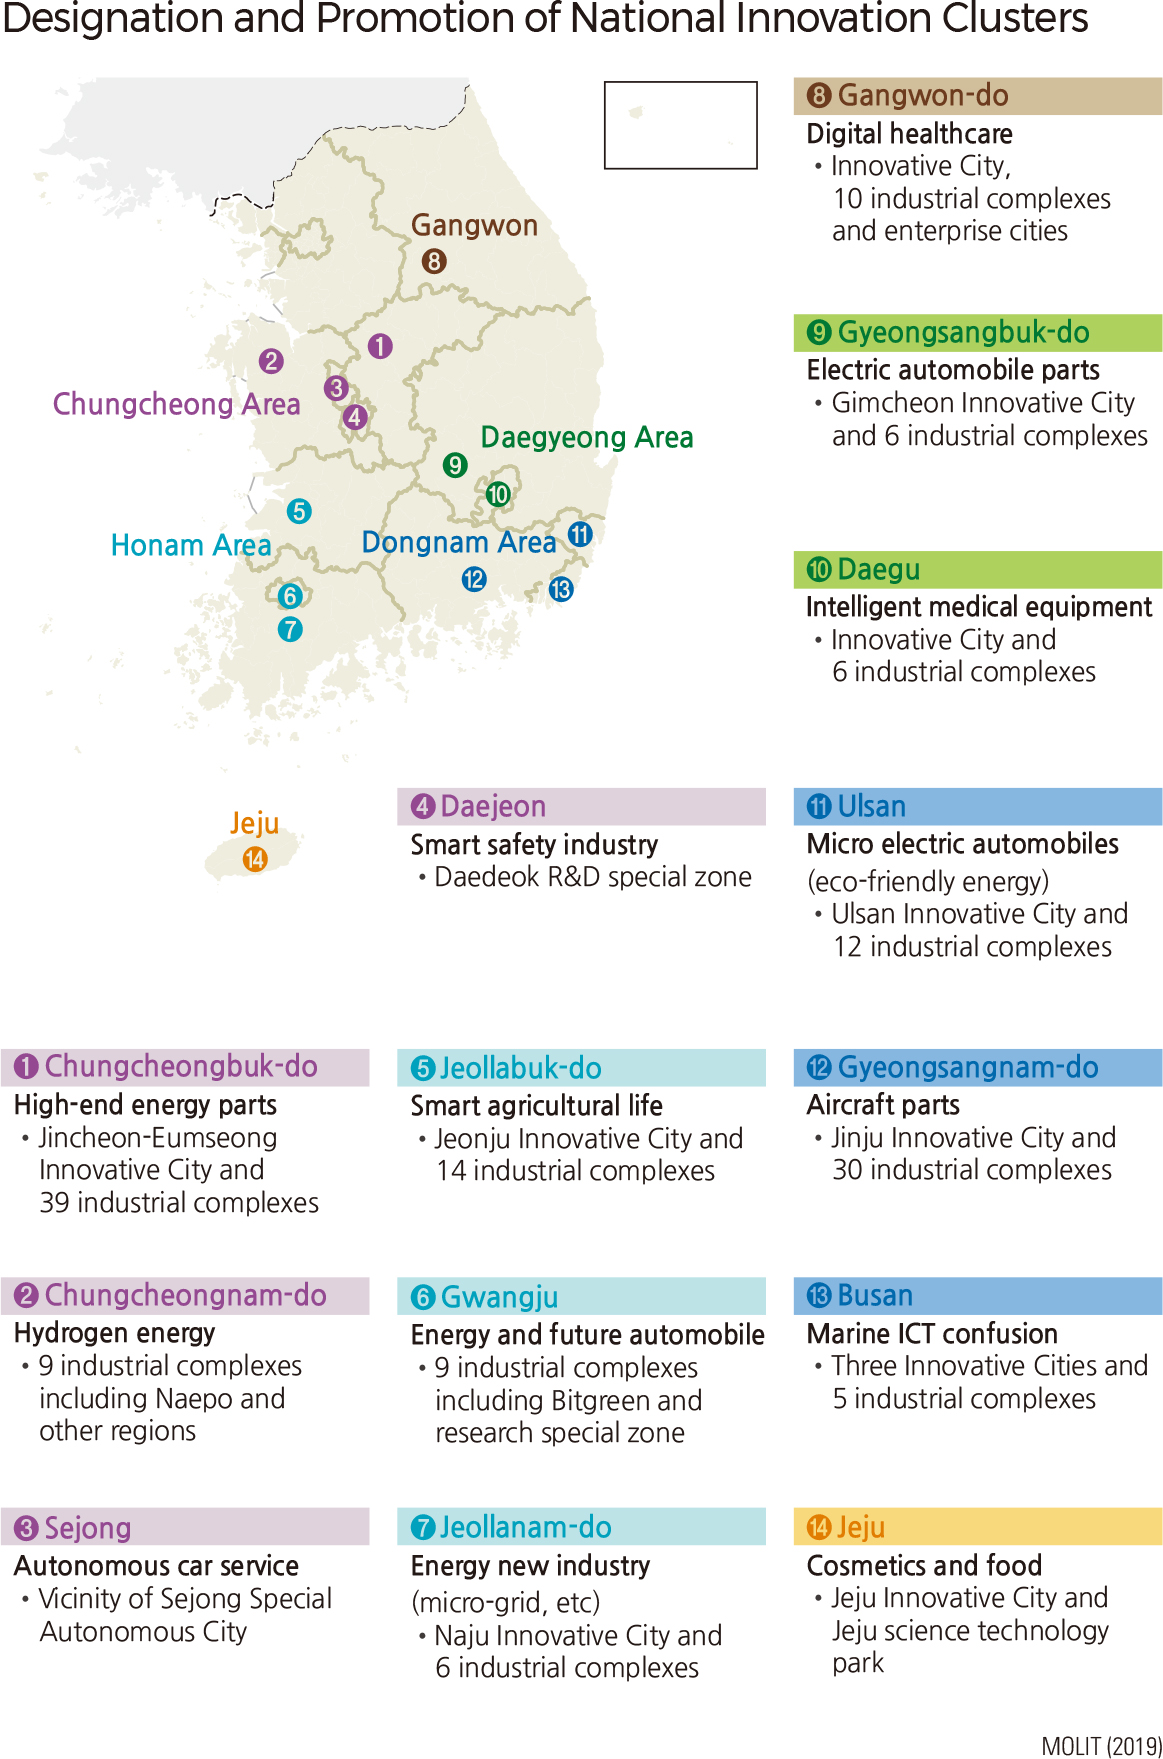 Designation and Promotion of National Innovation Clusters